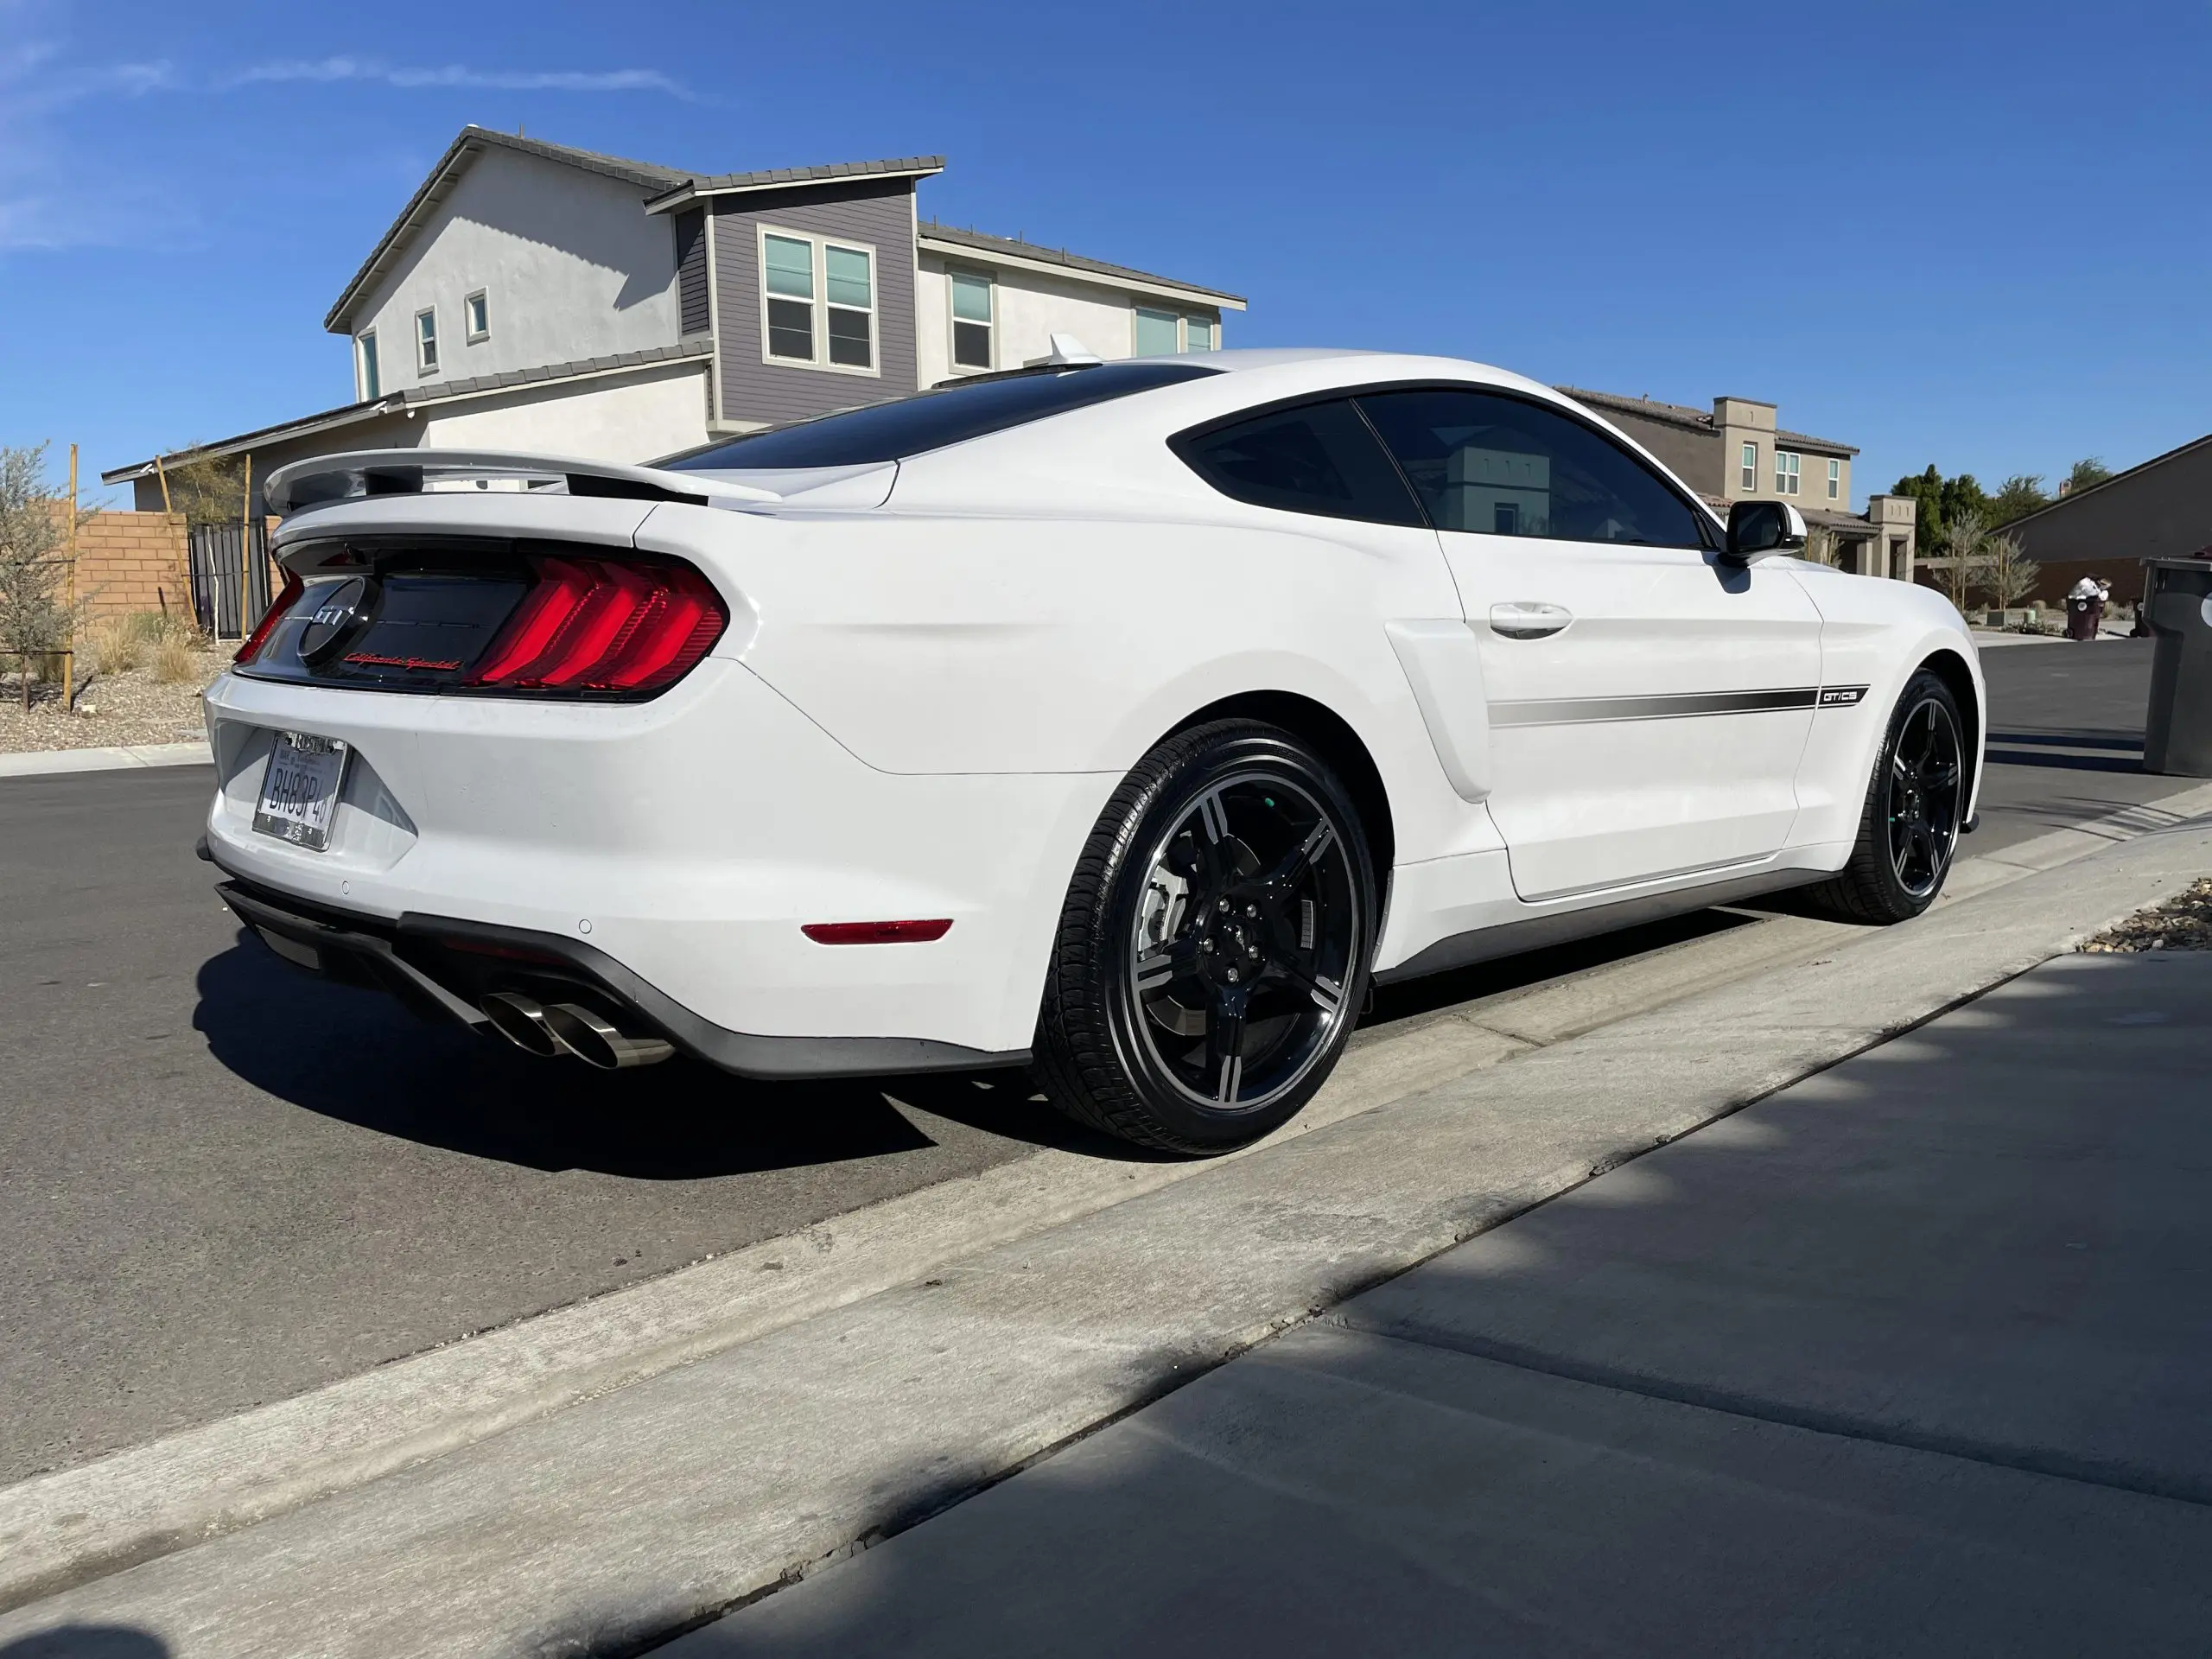 Mustang Of The Day: 2020 Ford Mustang GT/CS California Special